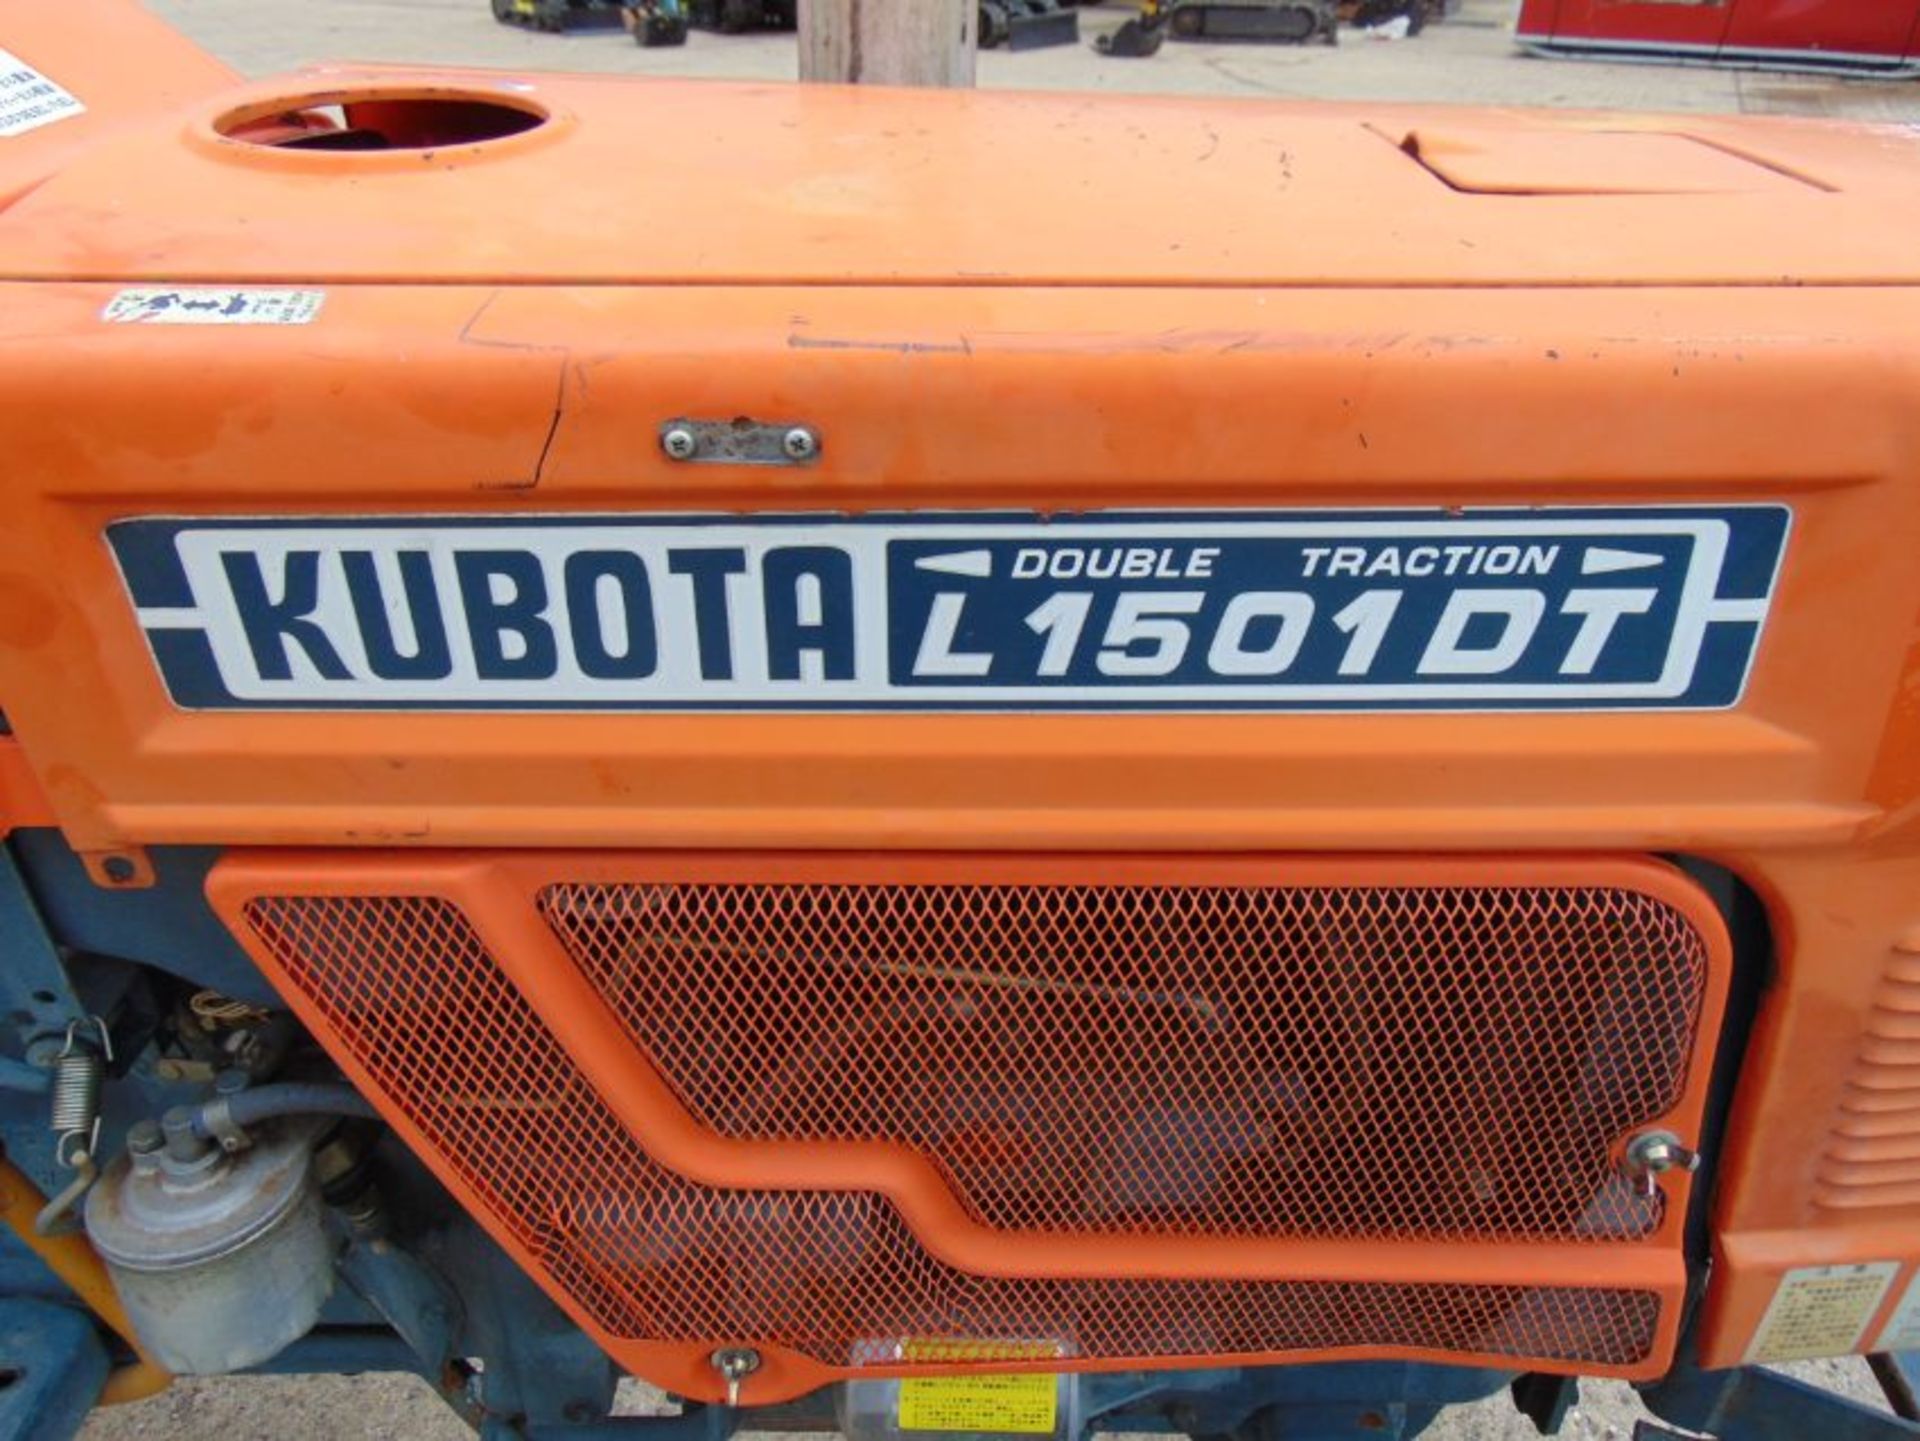 Kubota L1501DT 4WD Compact Tractor ONLY 1691 HOURS! - Image 15 of 15